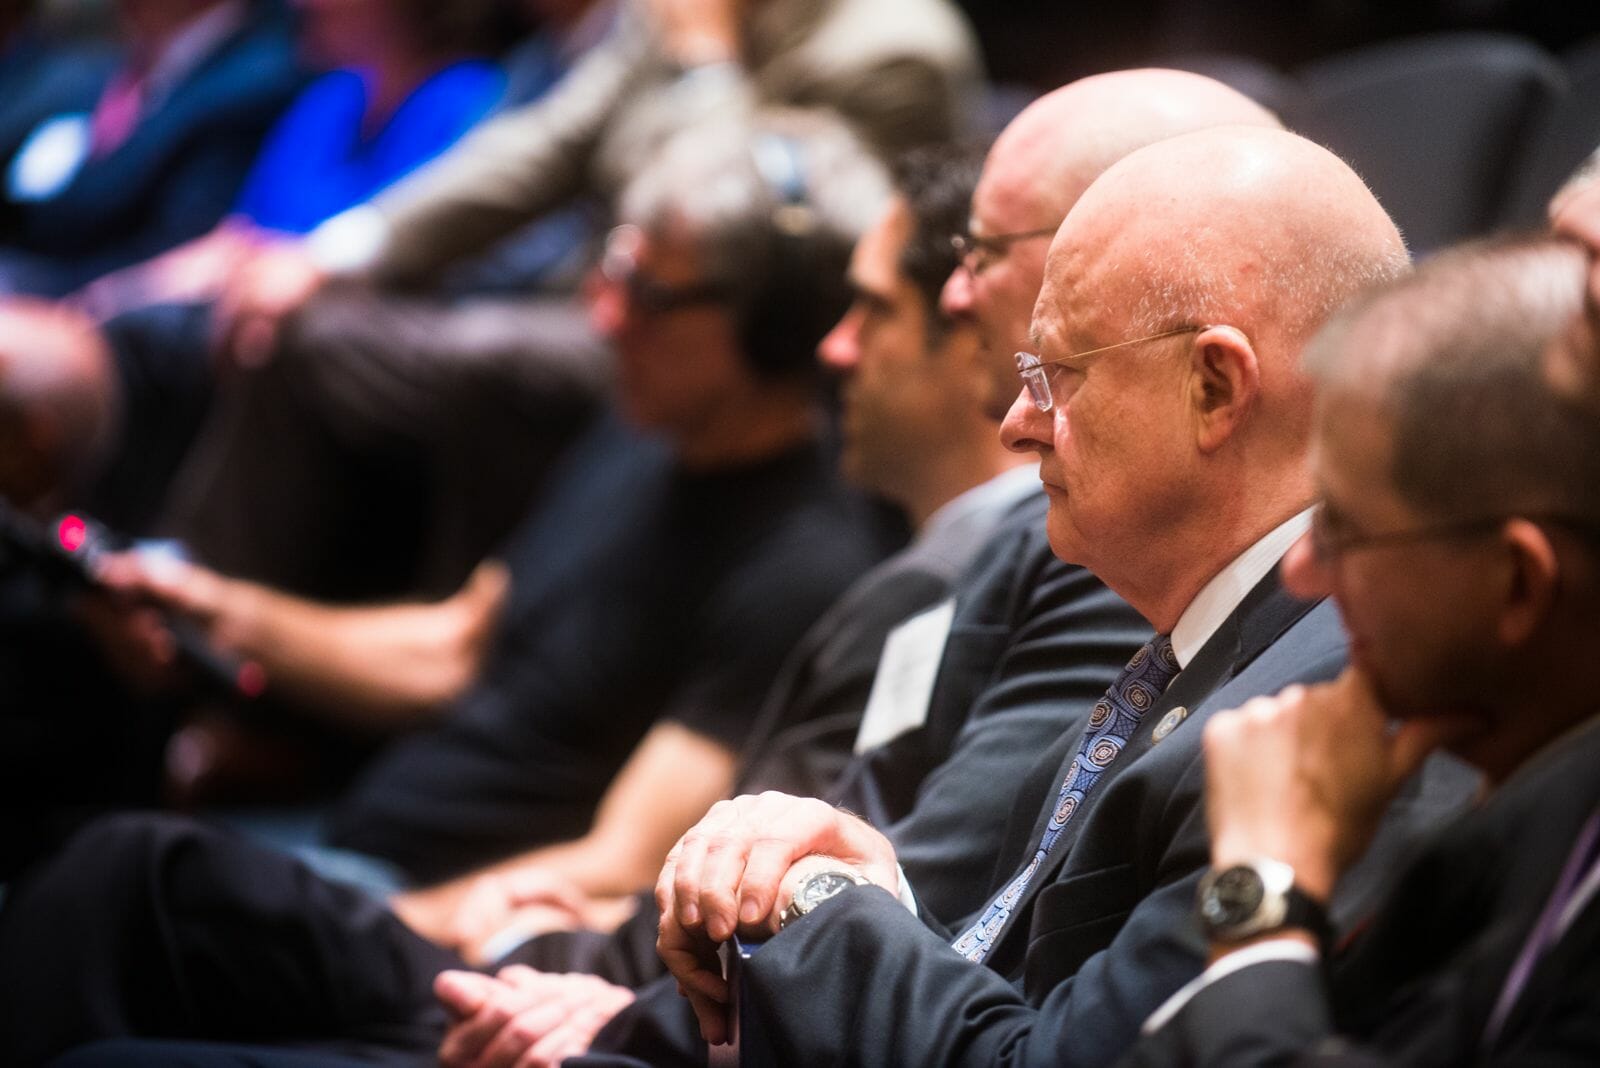 Clapper in audience